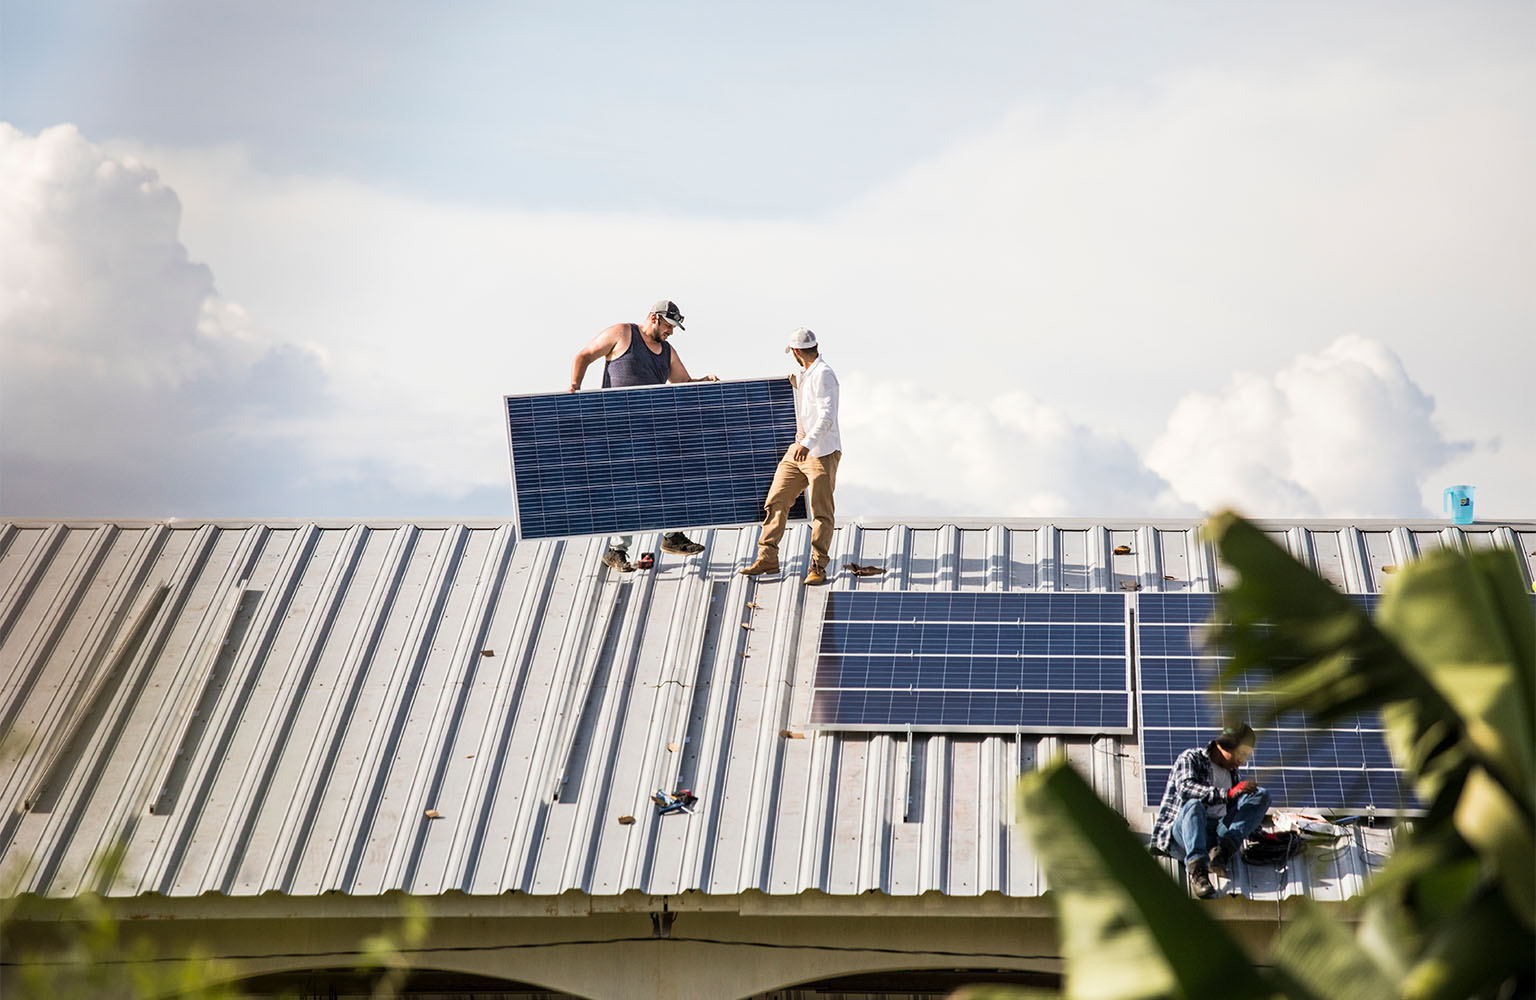 People installing solar panels on a roof